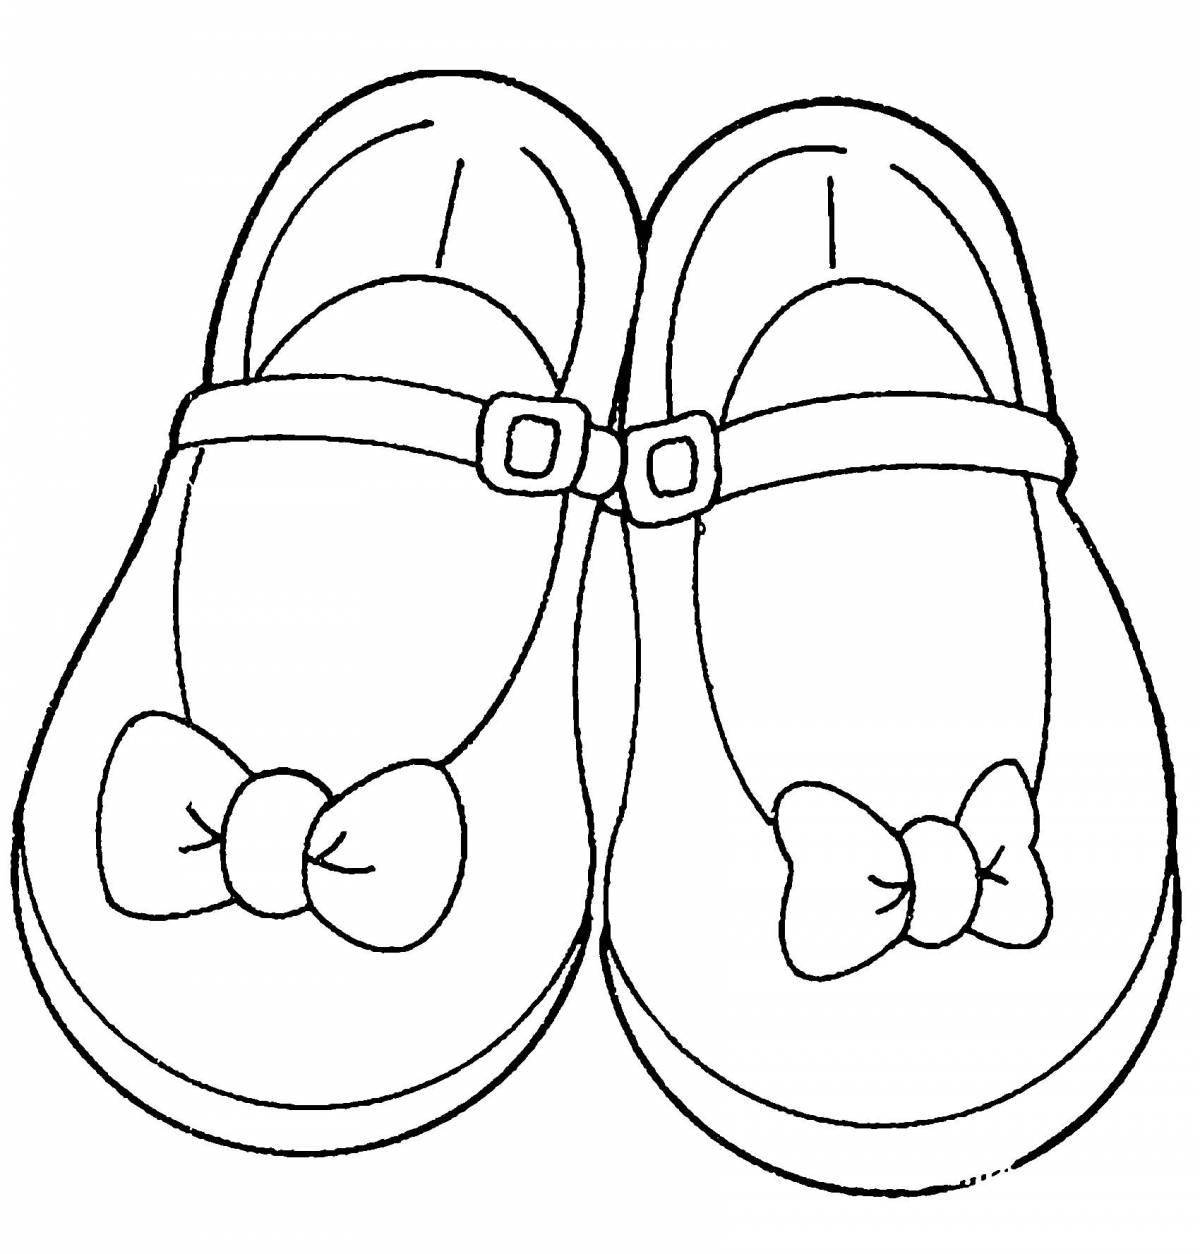 Coloring page delicate sandals